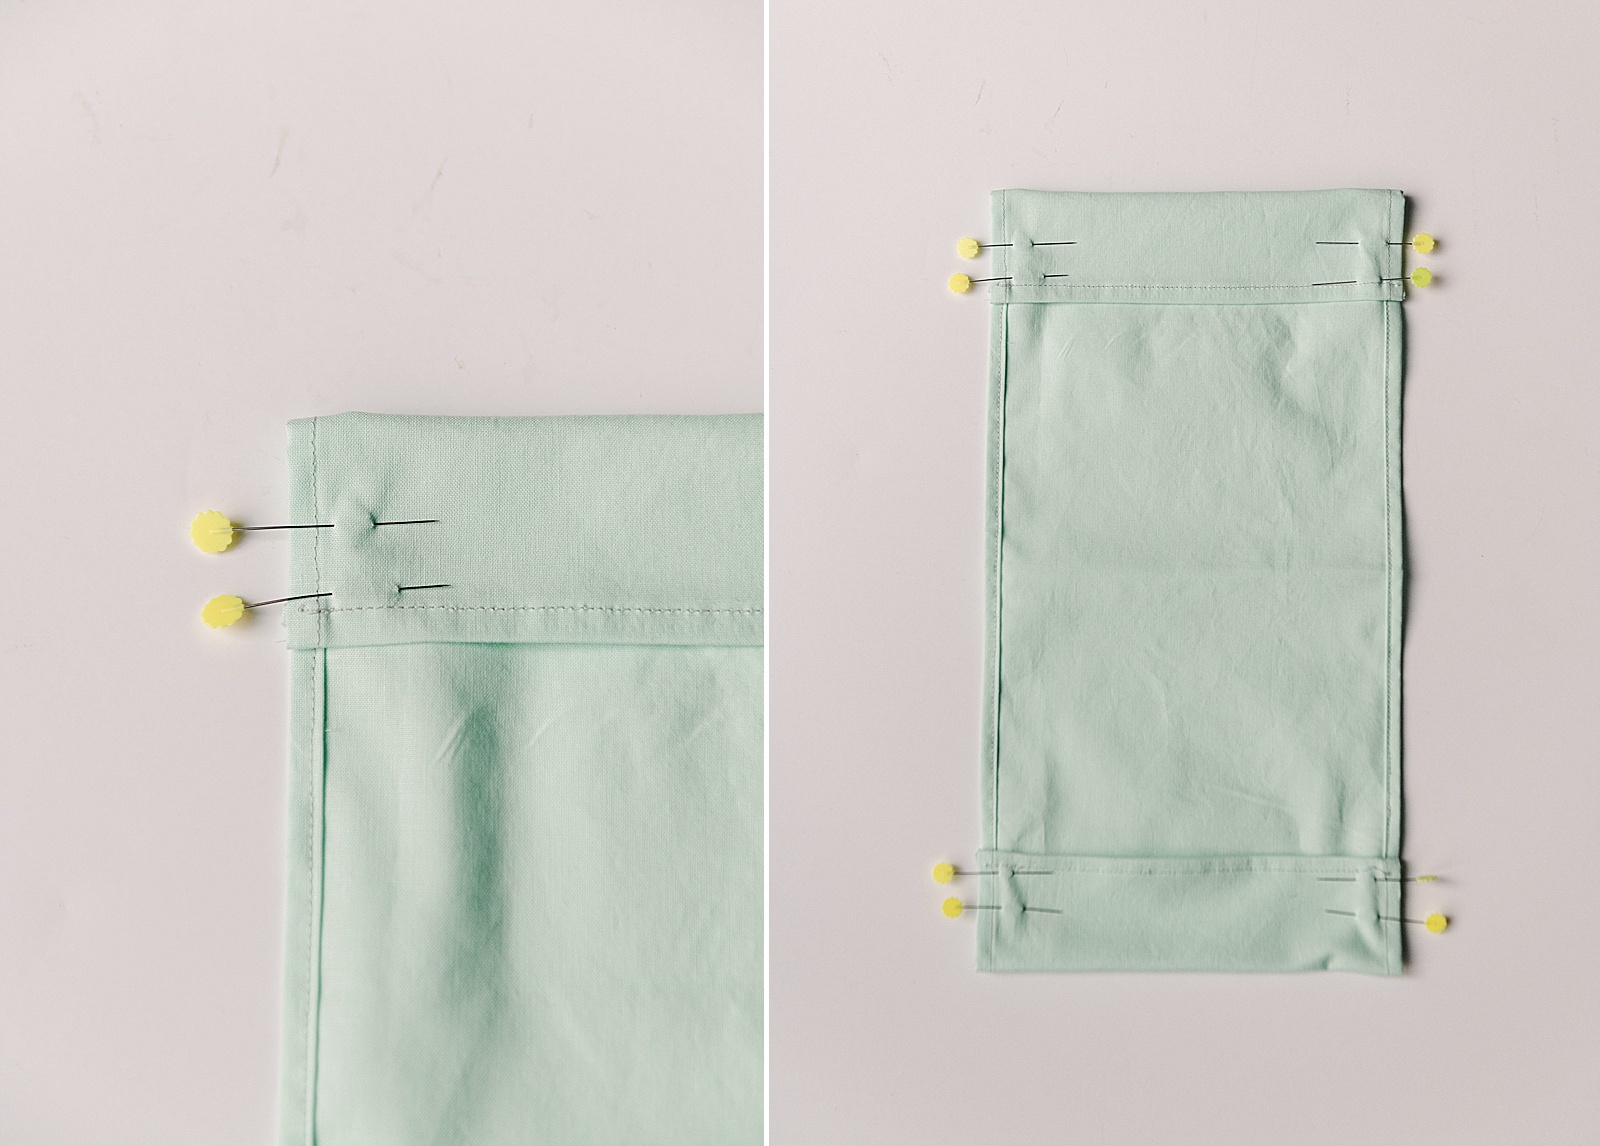 Easy drawstring pouch pattern, easy sewing pattern, simple sewing pattern, drawstring sewn pouch, how to sew a drawstring pouch, free sewing pattern